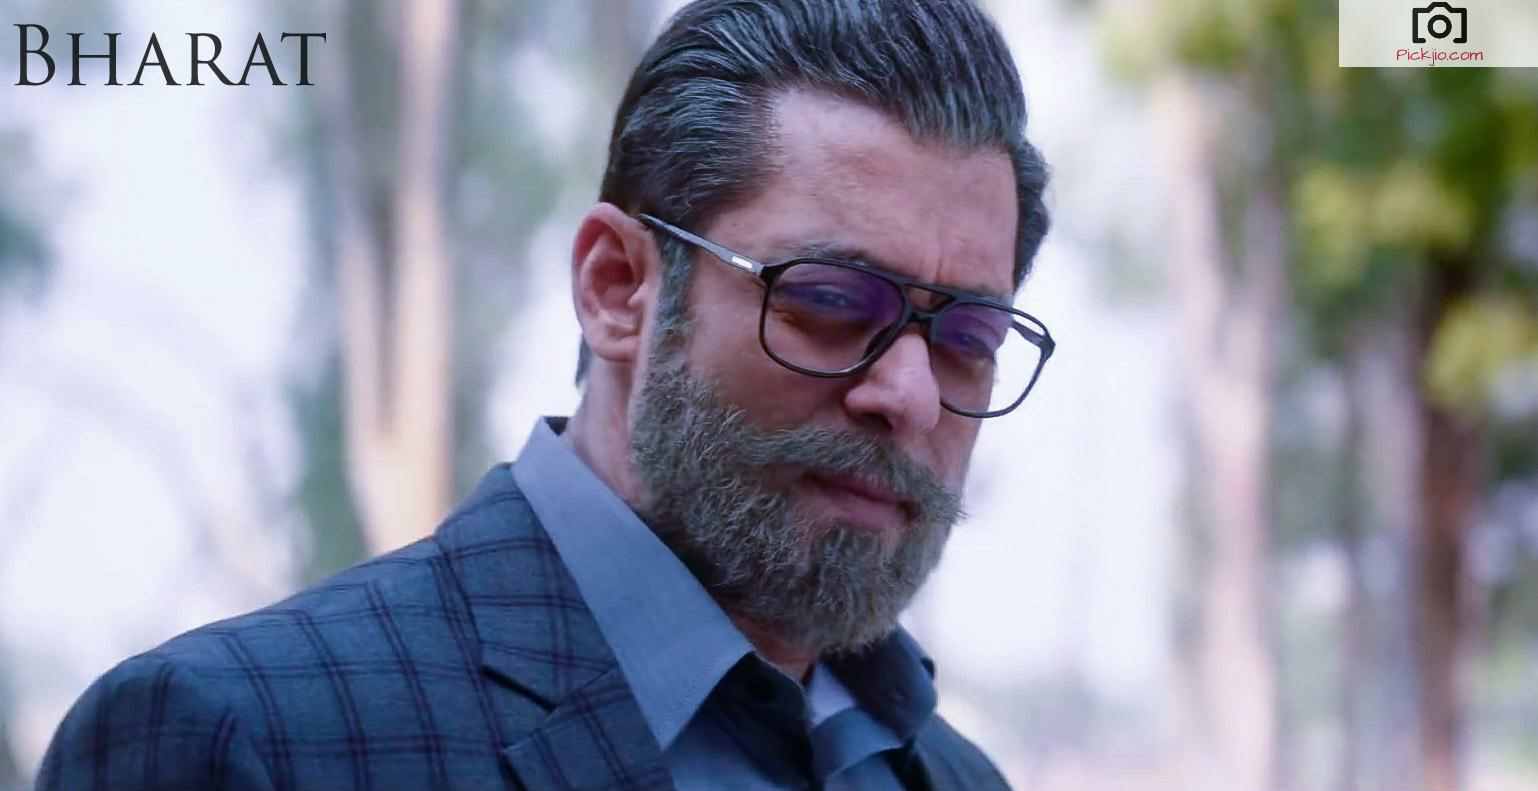 Bharat Movie Posters and HD Wallpaper for Mobile & PC